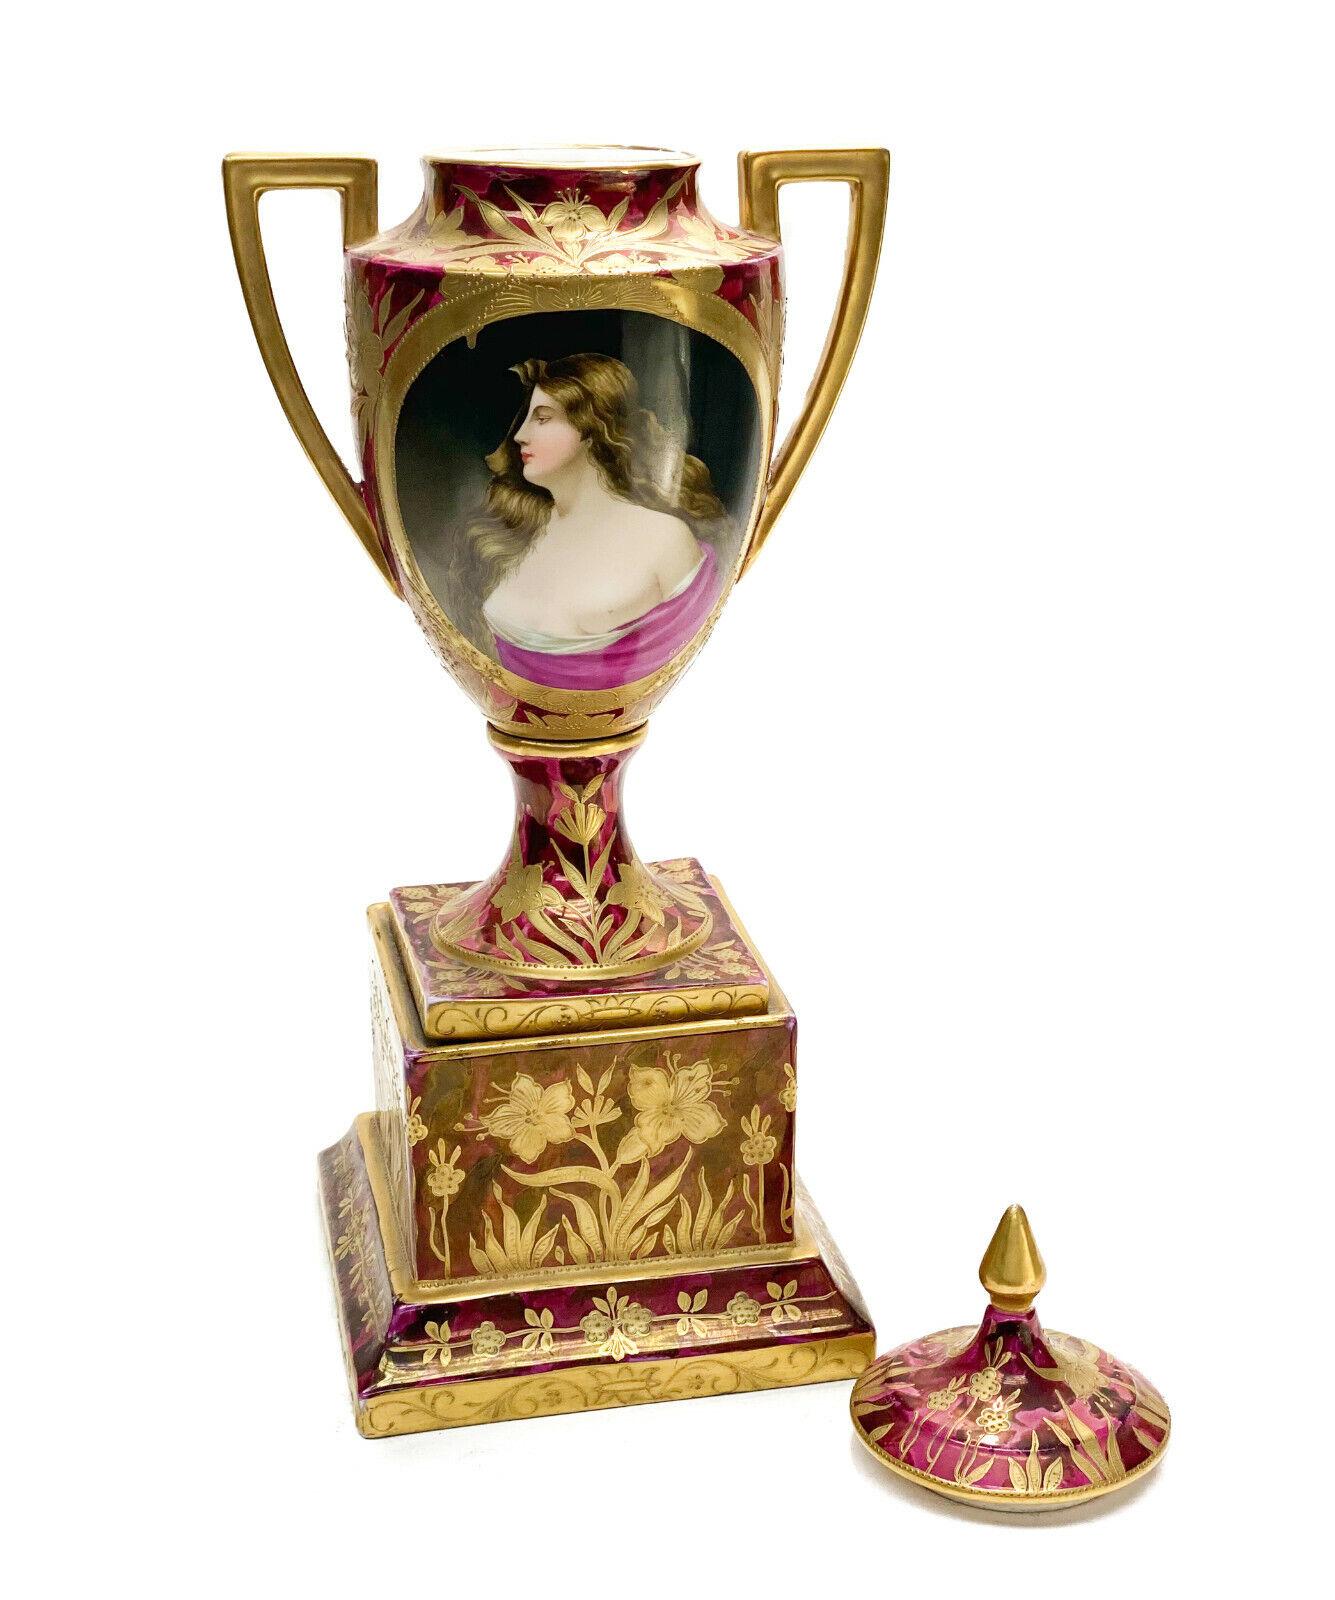 Hand-Painted Royal Vienna Austria Hand Painted Porcelain Double Handled Urn, circa 1900 For Sale